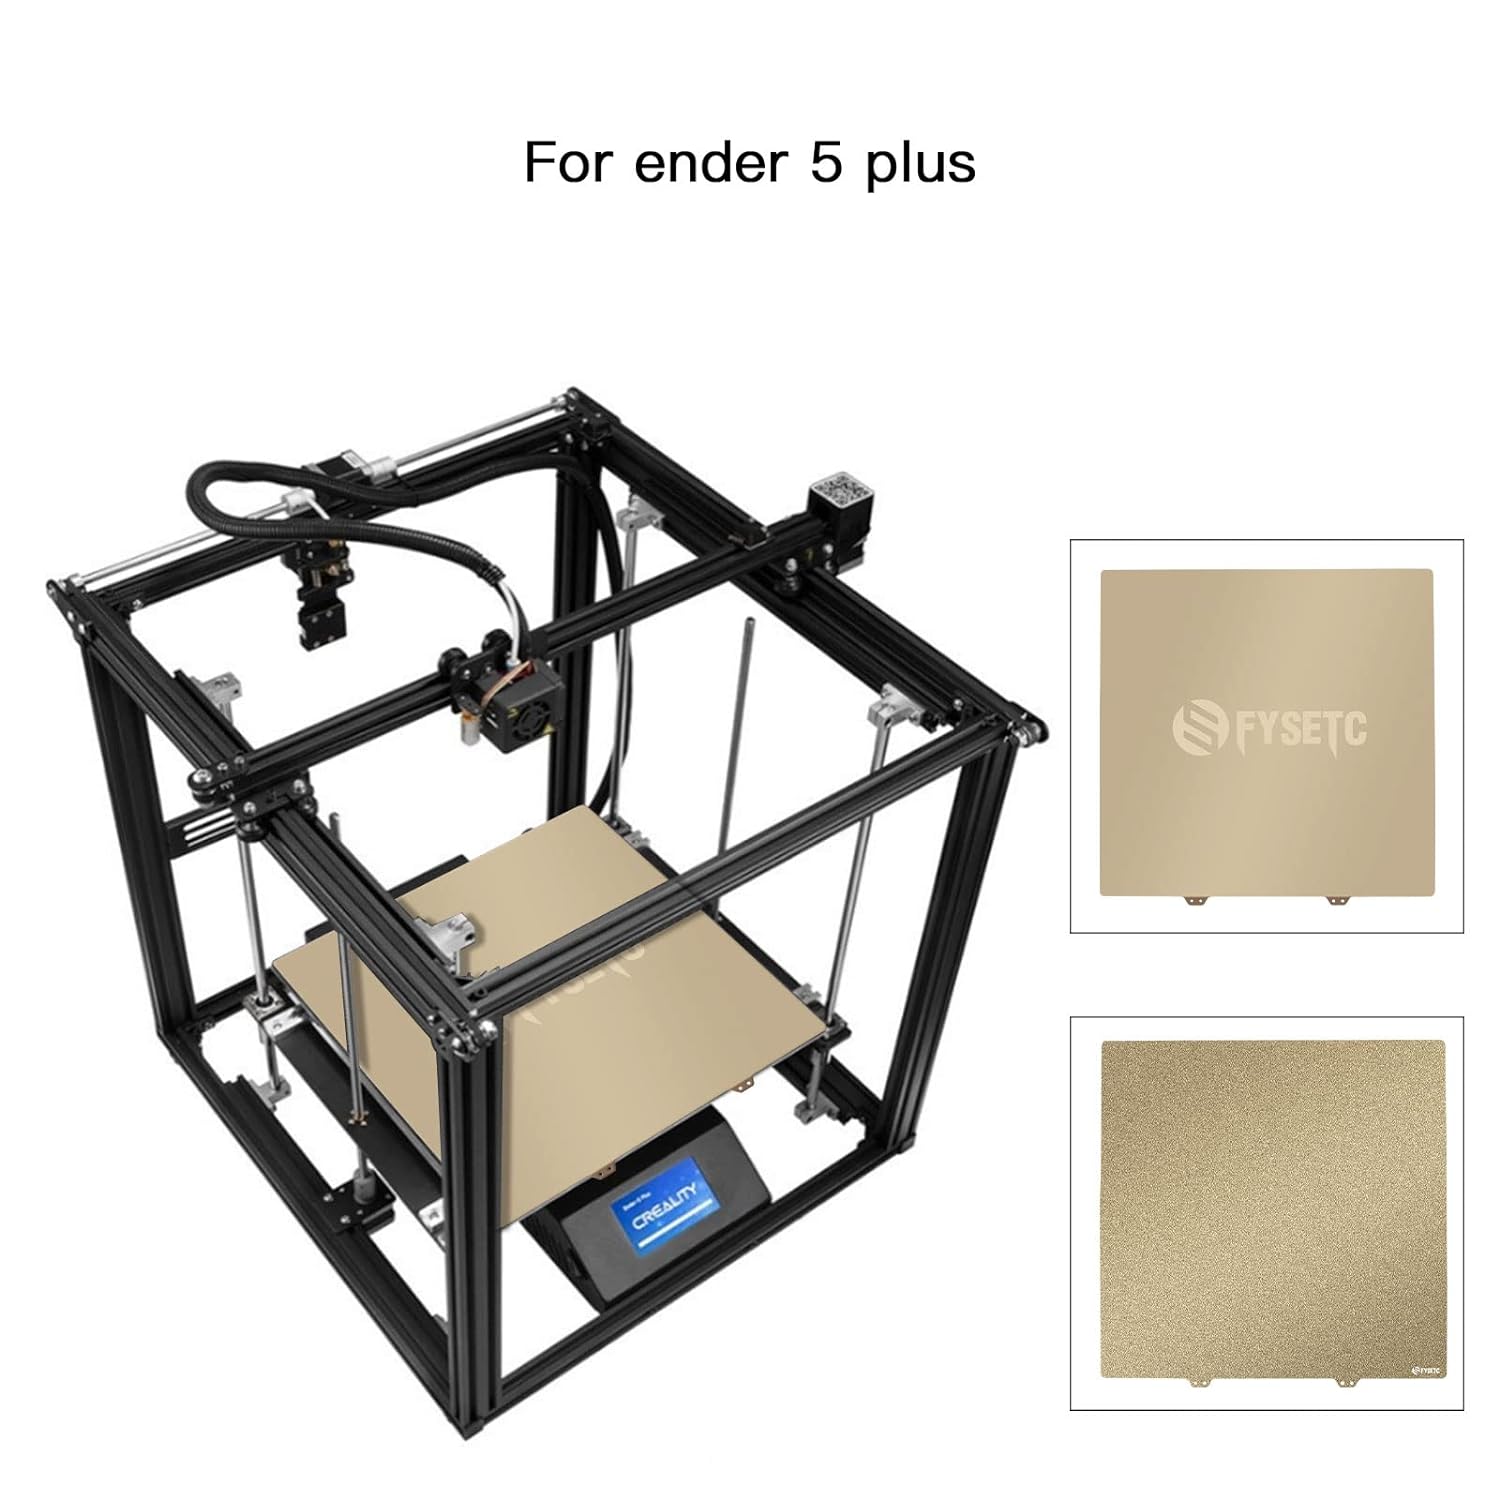 FYSETC 3D Printer Ender 5 Plus JanusBPS Build Plate: 377x370mm/ 14.84X14.56inch Double Sided Gold PEI Powder - Smooth PEI with Bottom Sheet Adhesive Spring Steel Platform Heated Bed Part